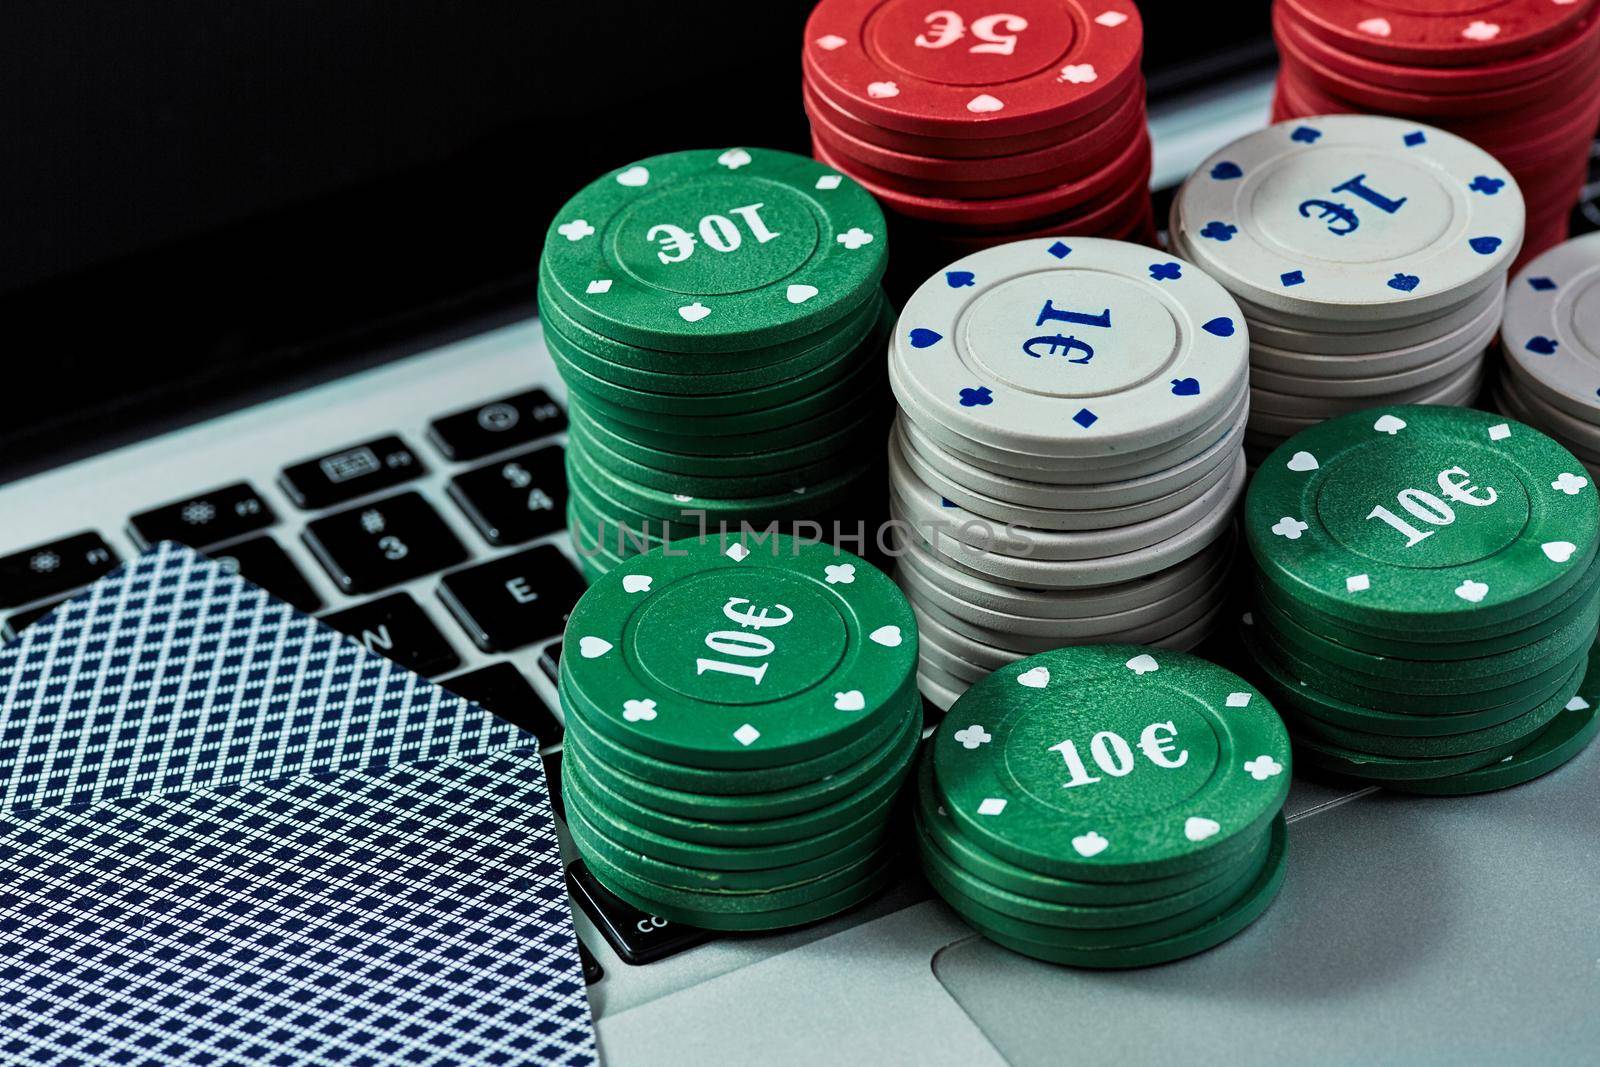 View of casino chips and cards on a laptop to play online. Concept for online gambling, poker, virtual casino.